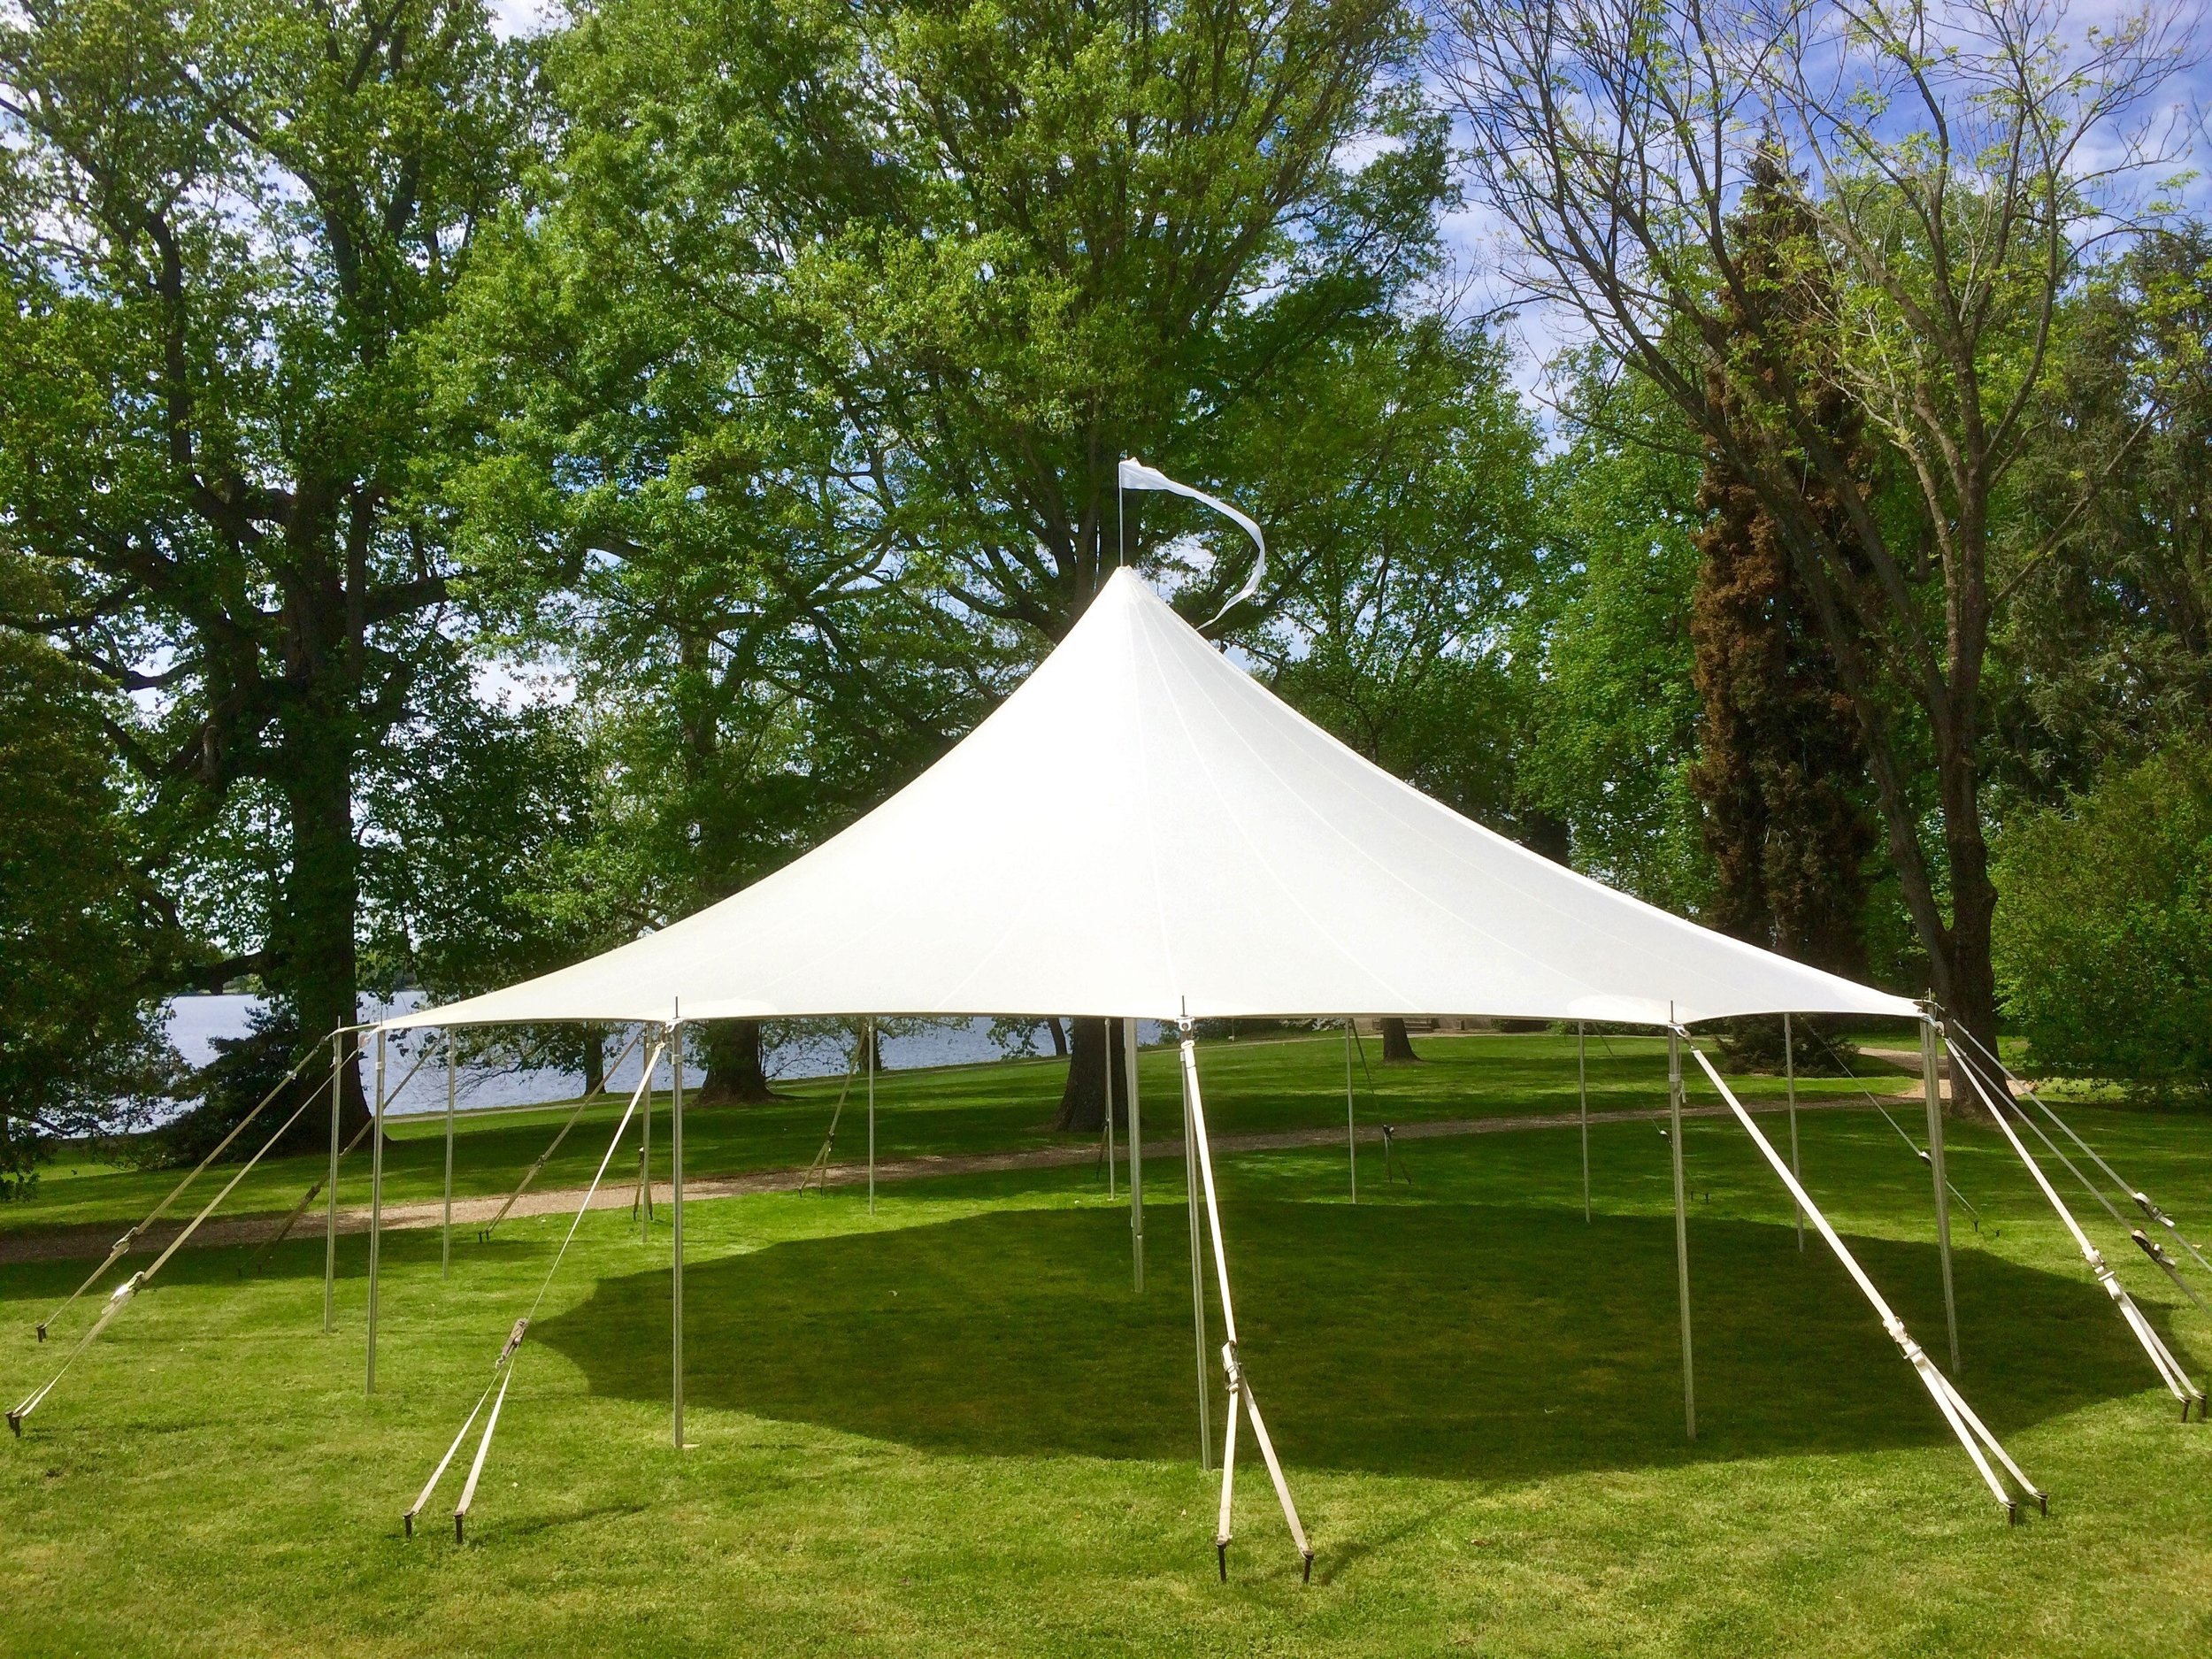 Sailcloth tents for rent in Jersey City, NJ